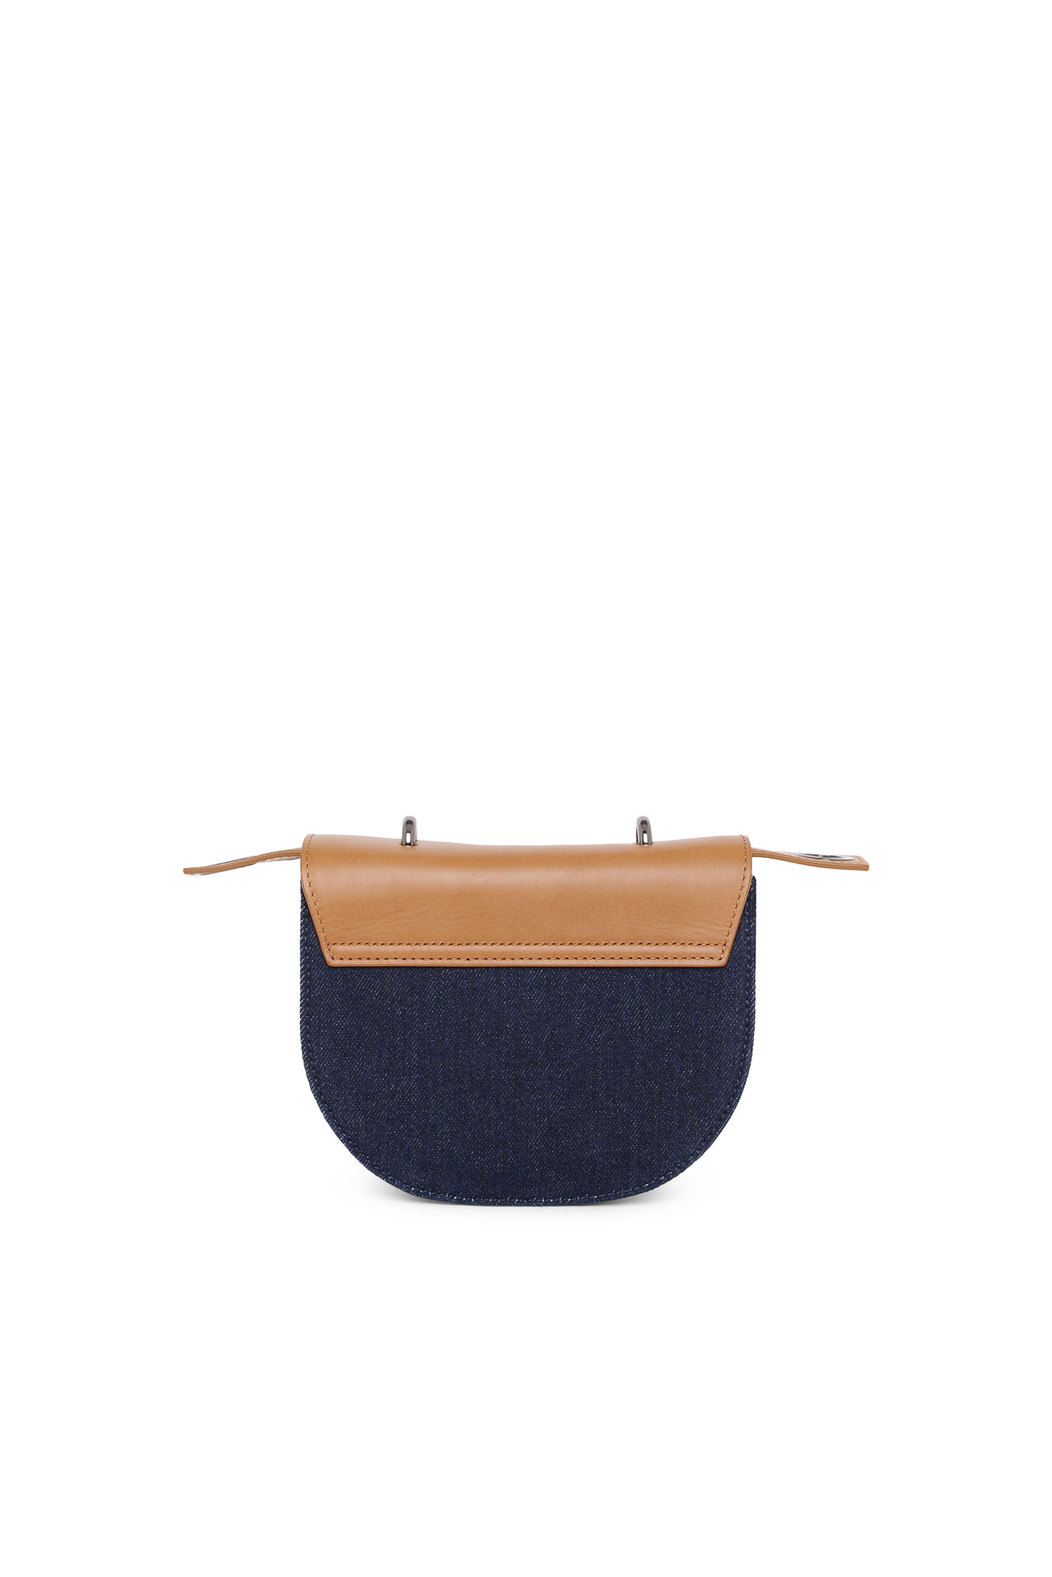 Saddle cross-body in denim and leather